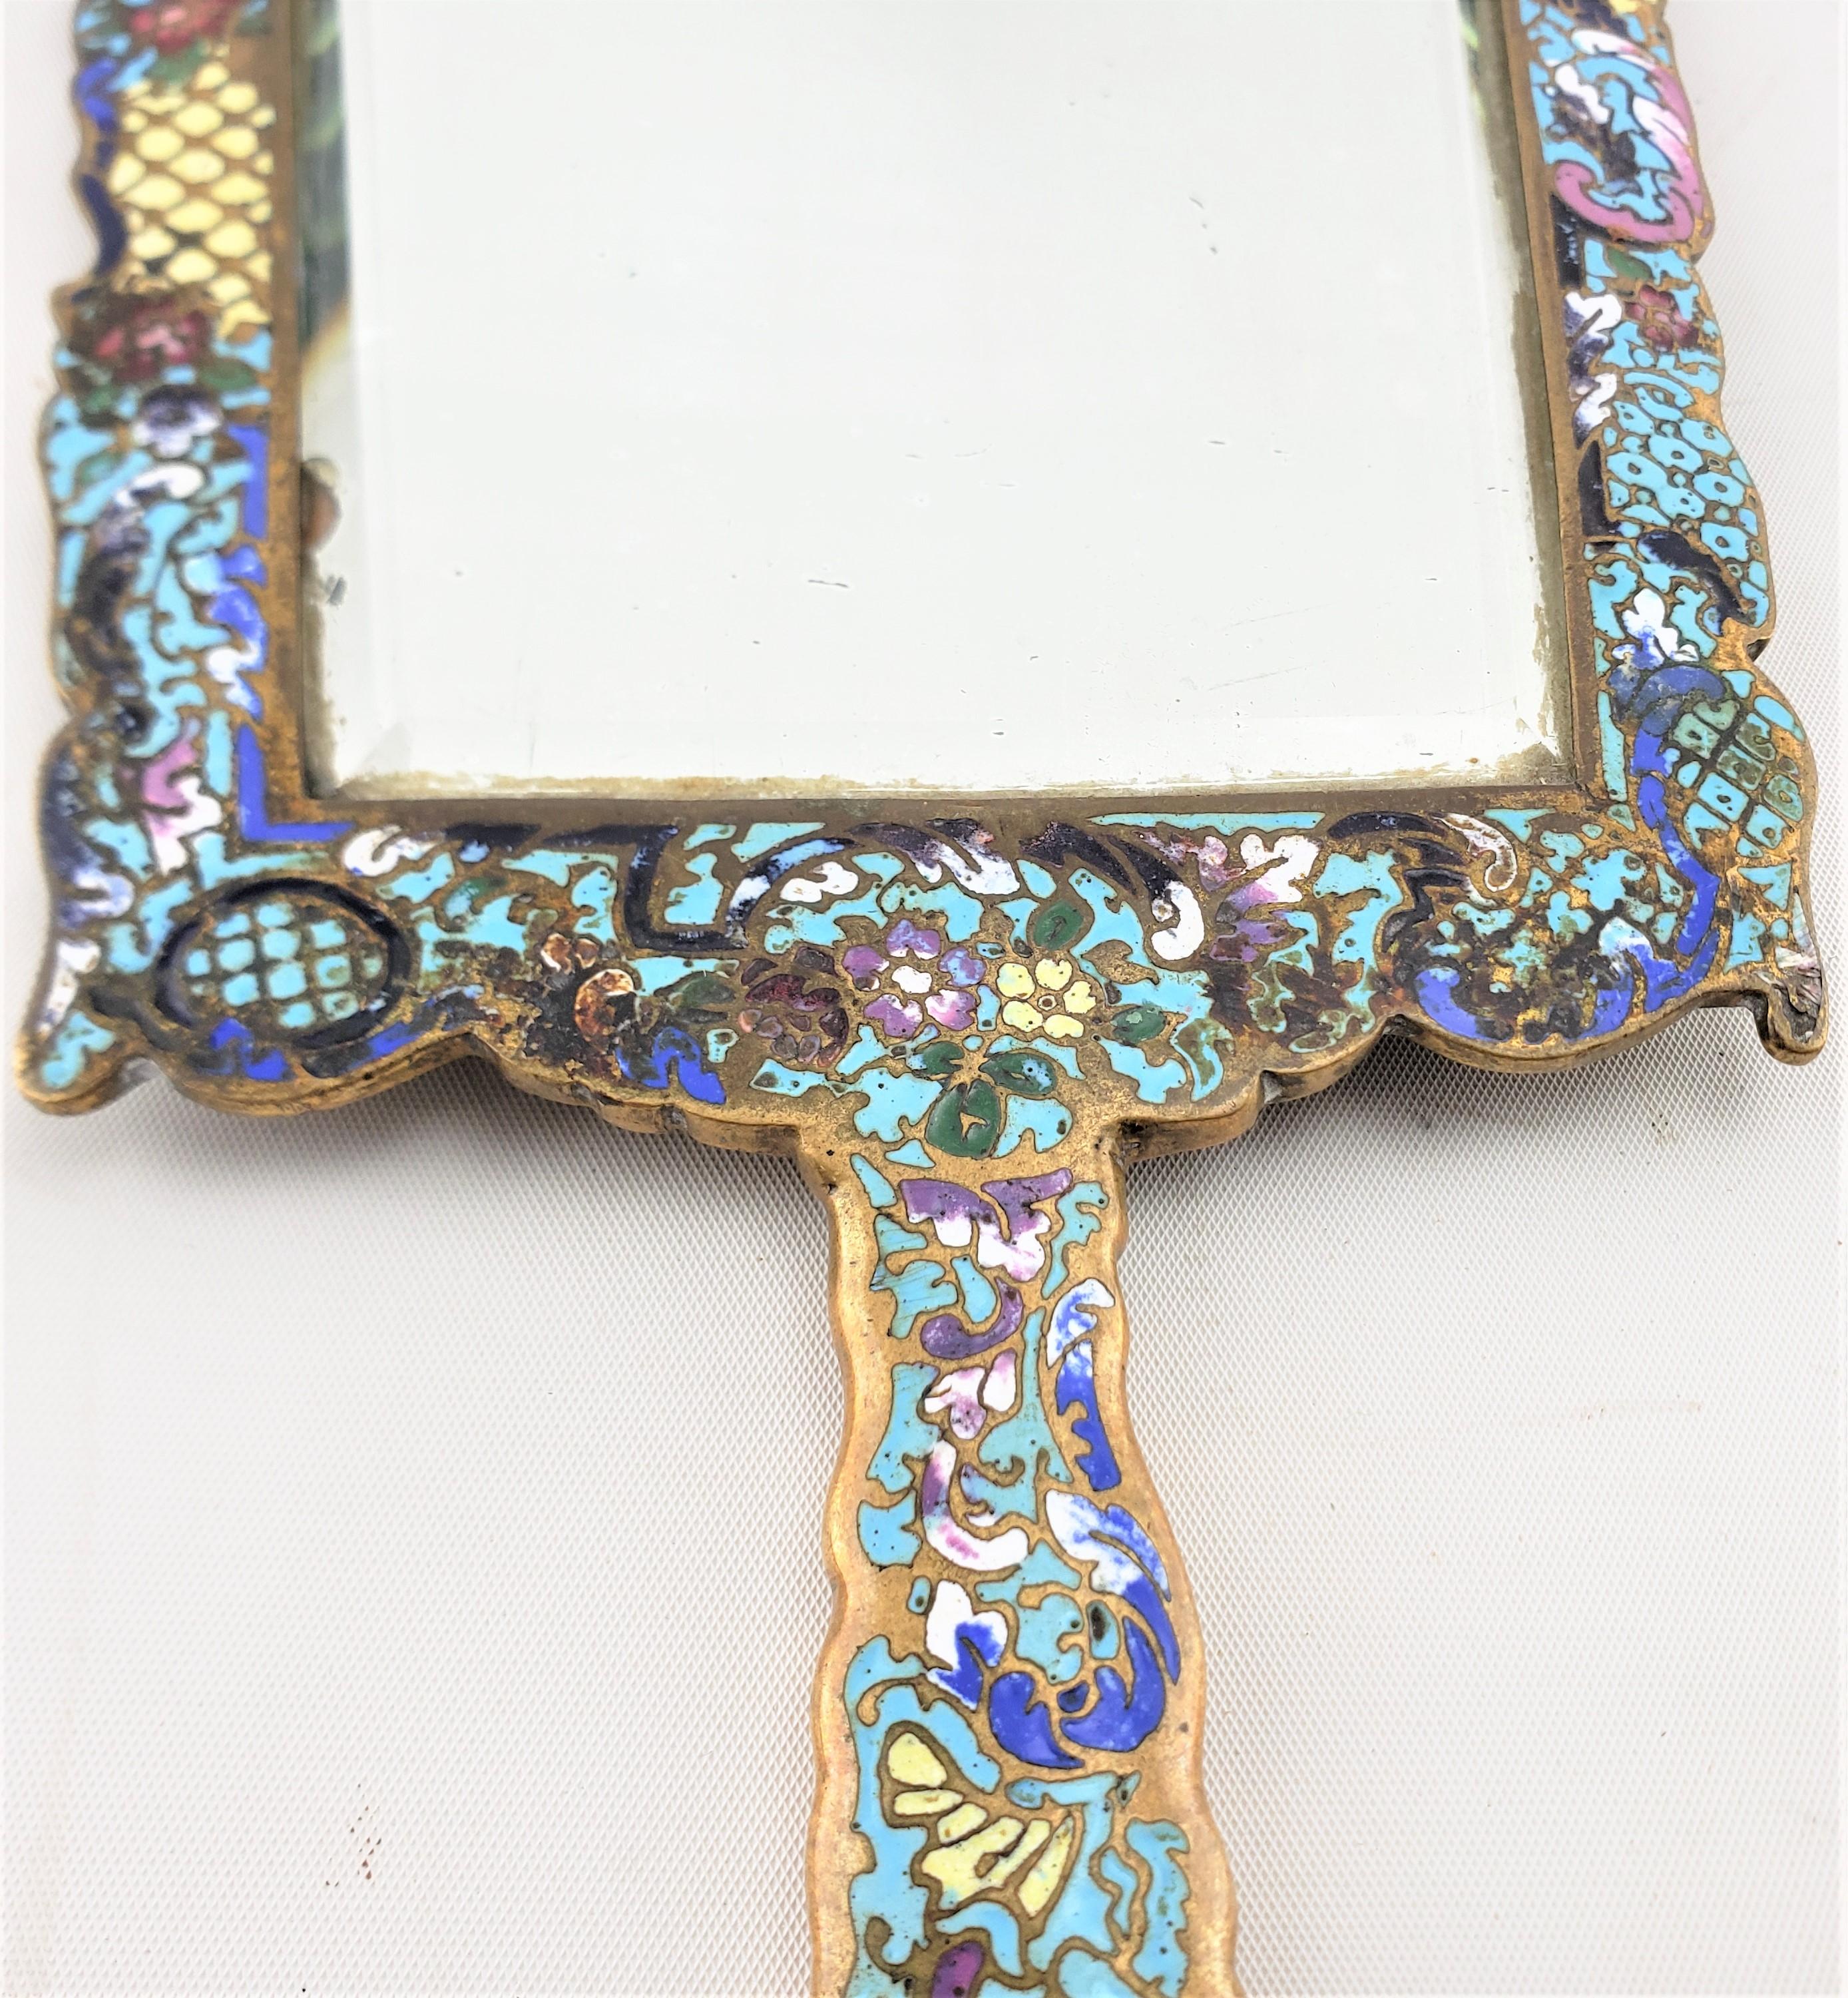 Antique French Champleve  Enameled Hand-Held Dresser Mirror with Floral Motif For Sale 3